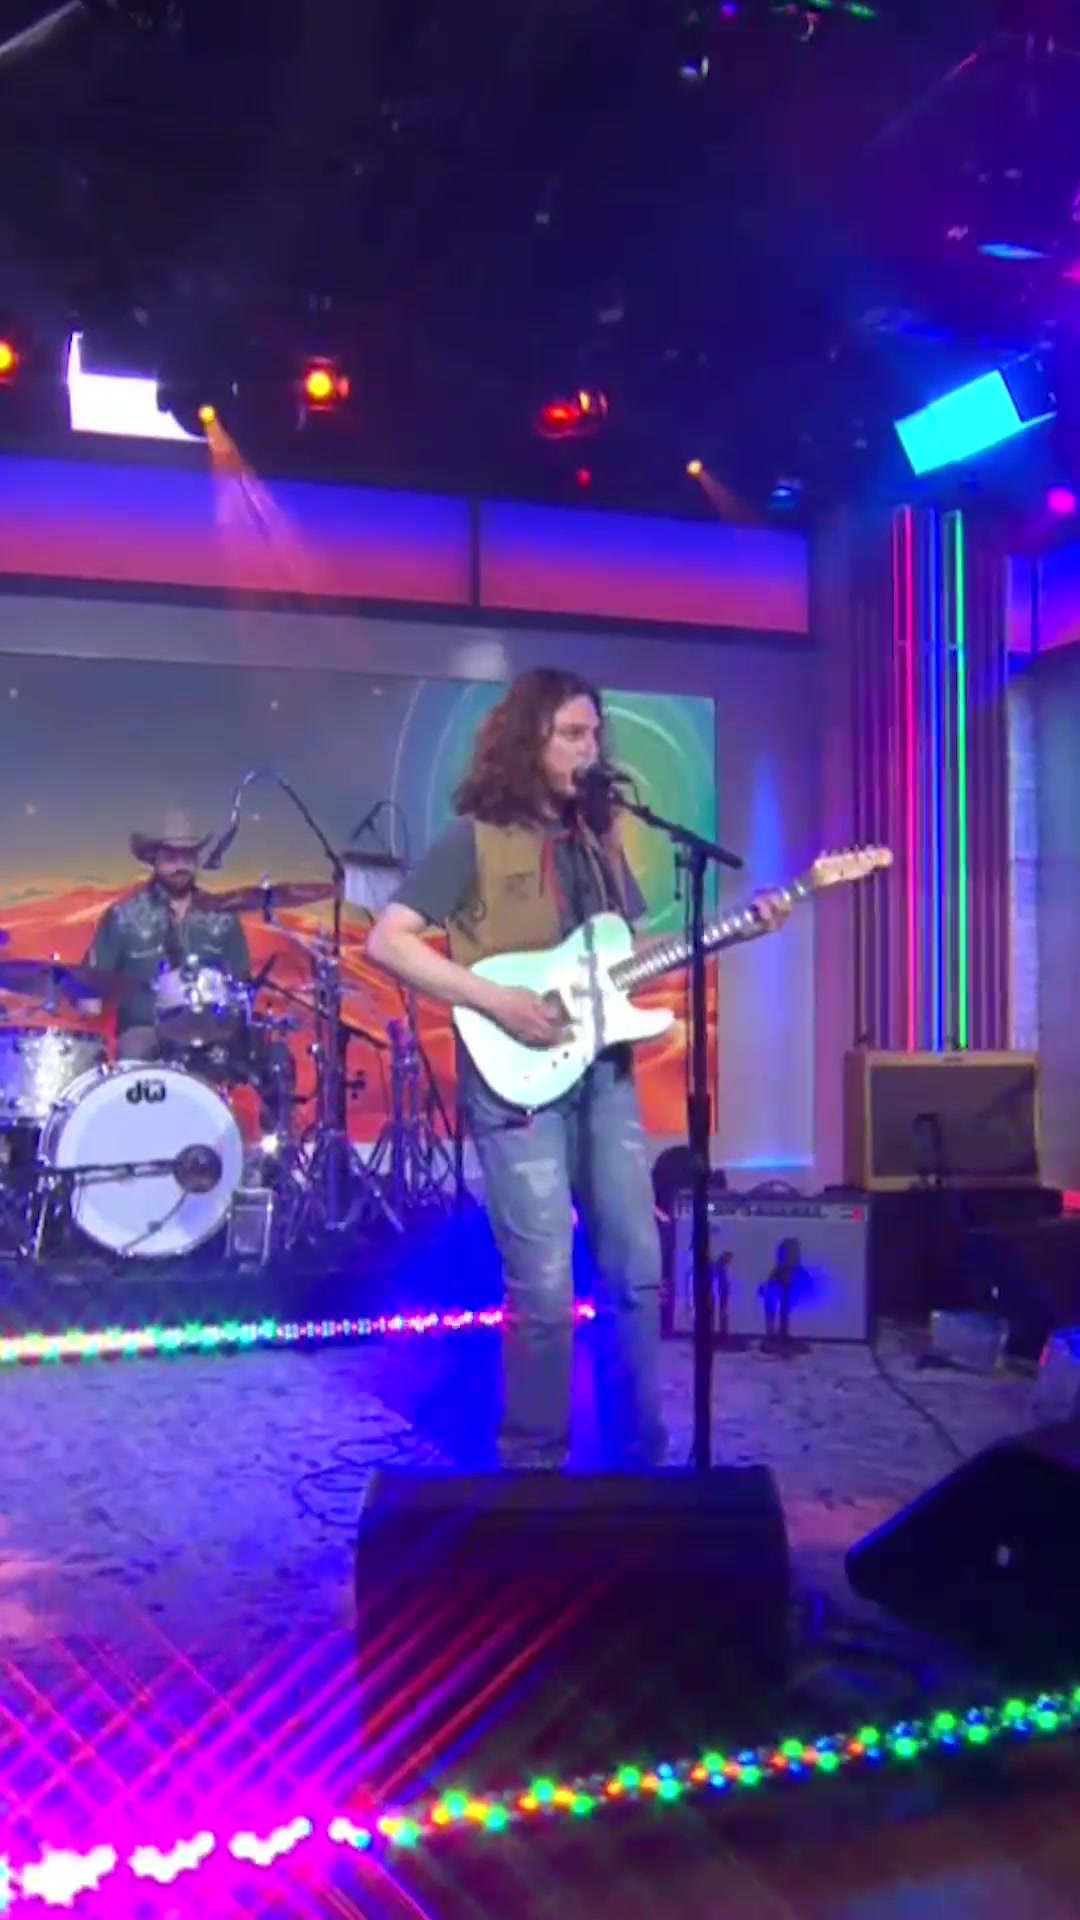 Born in #NewJersey and raised in Nashville, guitar phenomenon Daniel Donato formed his own band and has shared the stage with the likes of Bob Weir and other members of the #GratefulDead.  In their national TV debut, here's Daniel Donato's Cosmic Country with "Lose Your Mind" on #SaturdaySessions. #music #guitar